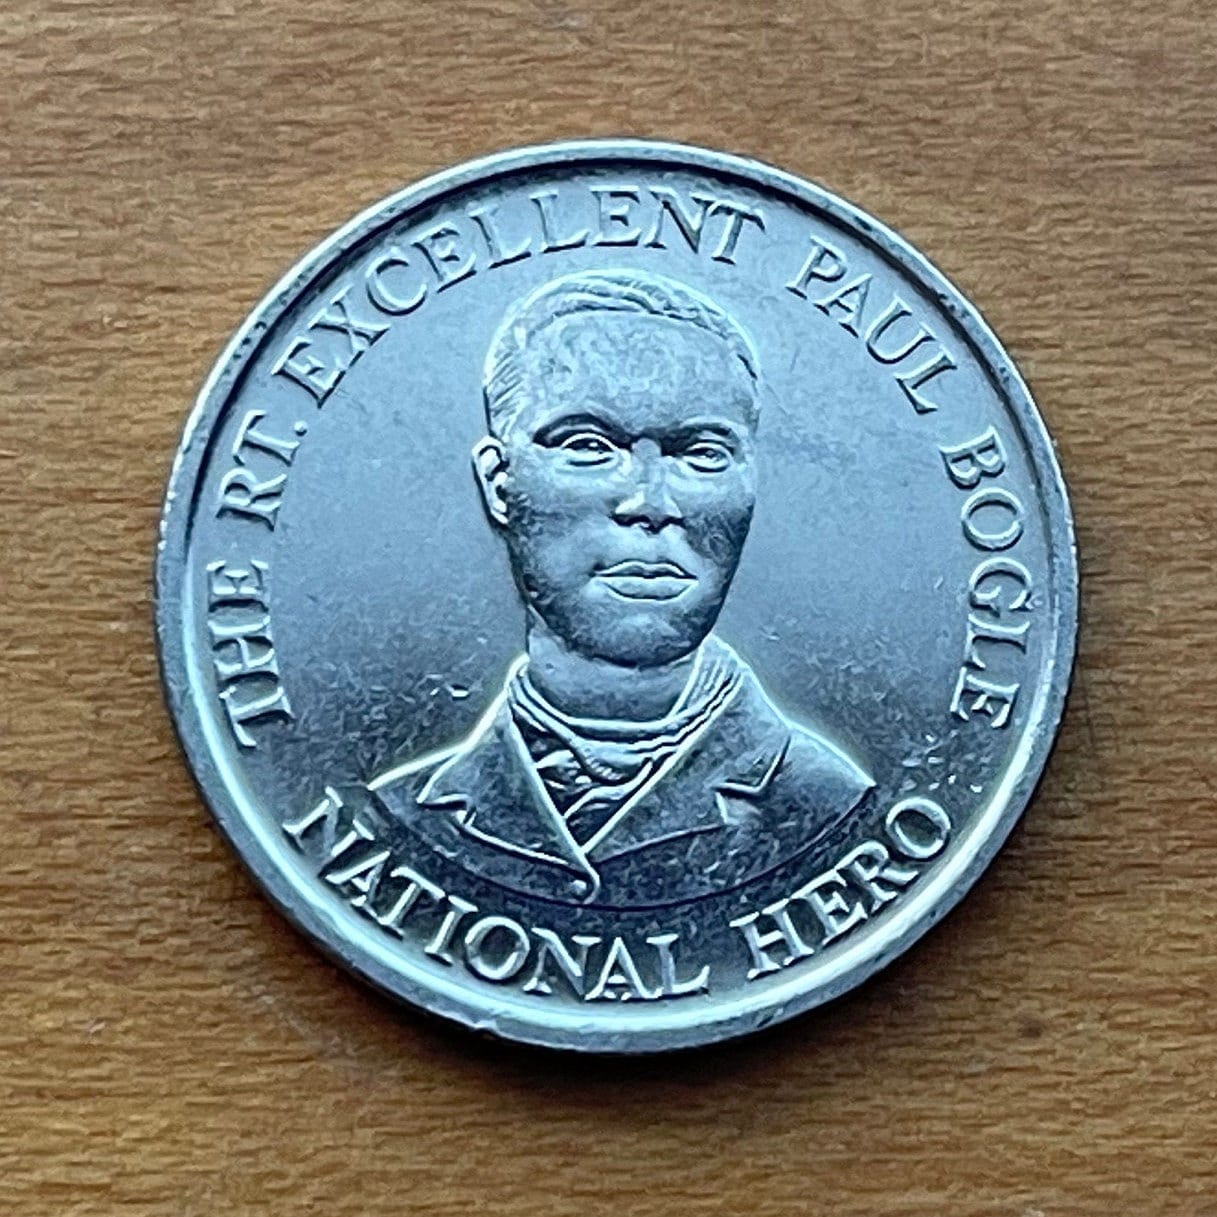 Paul Bogle 10 Cents Jamaica Authentic Coin Money for Jewelry and Craft Making (Freedom Fighter) (National Hero) (Black Power) BLM